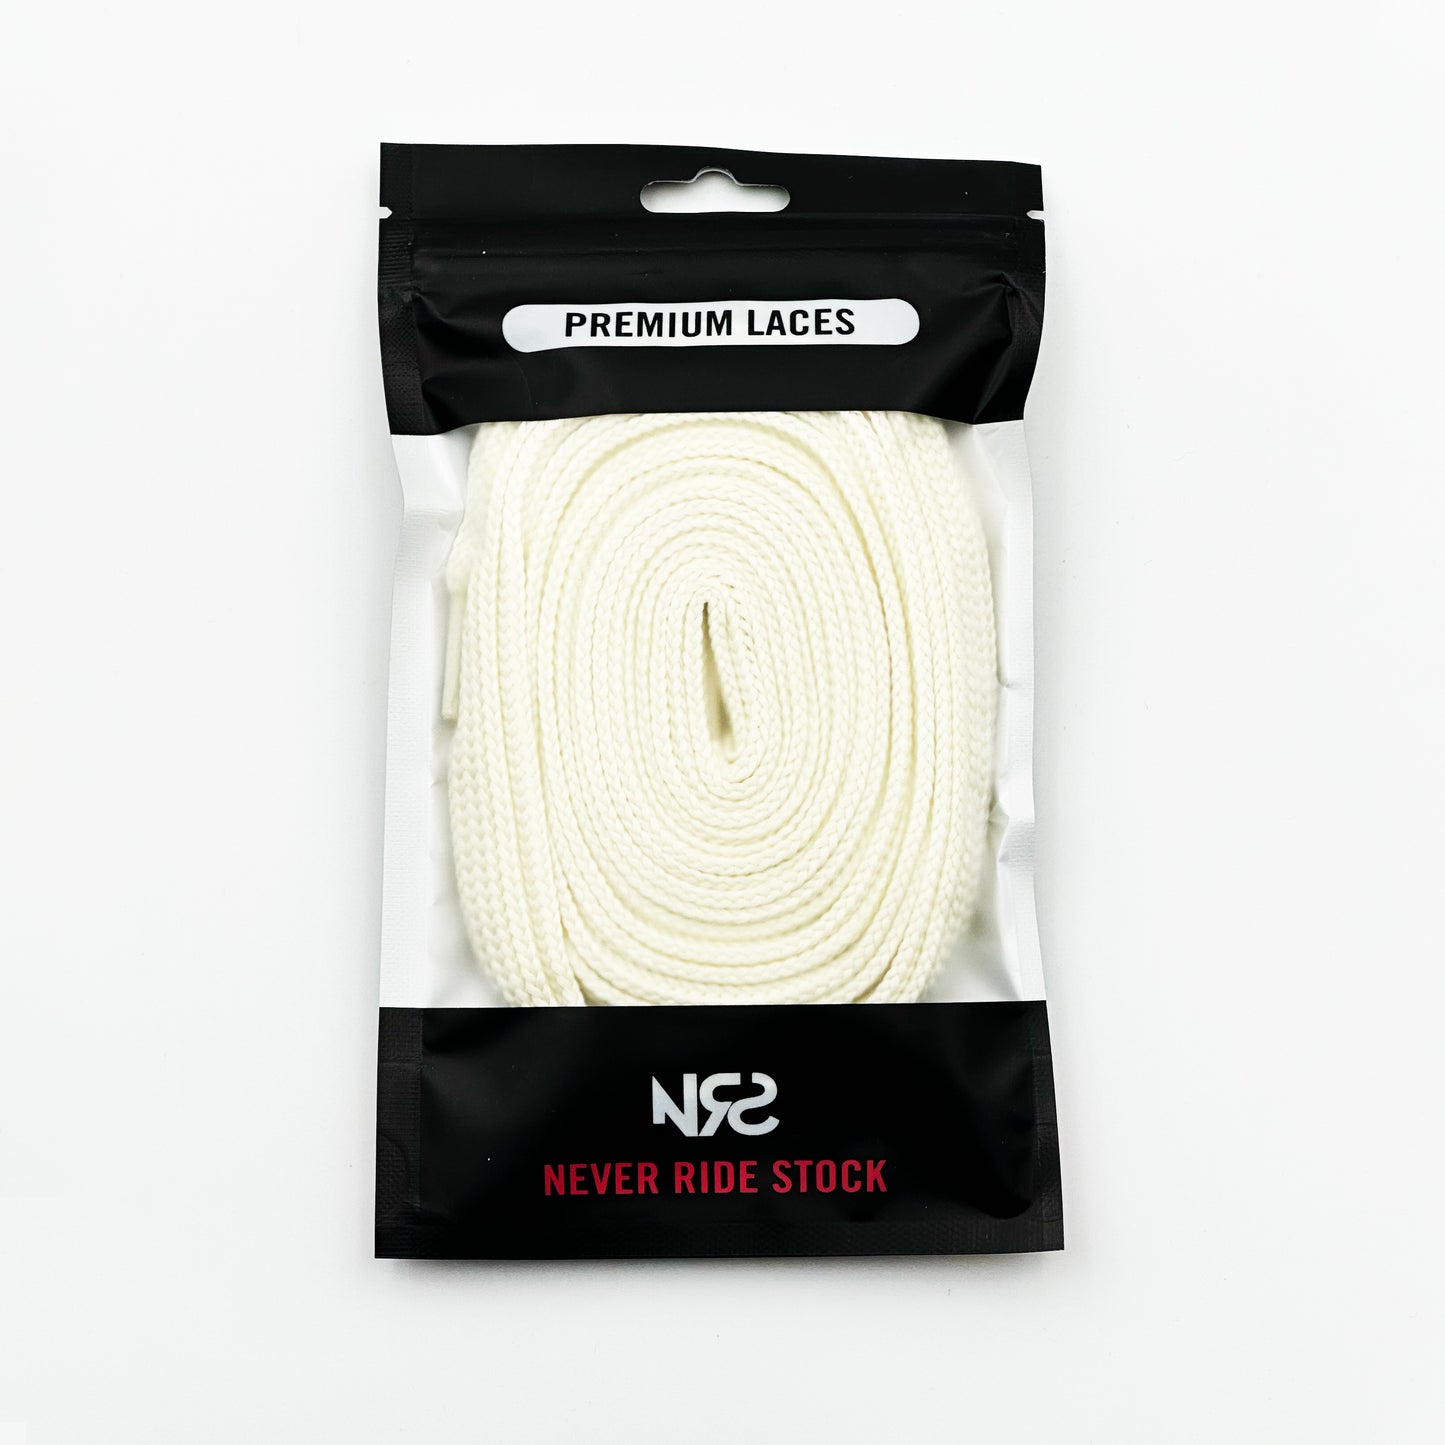 Skate Laces (3/4" Wide)